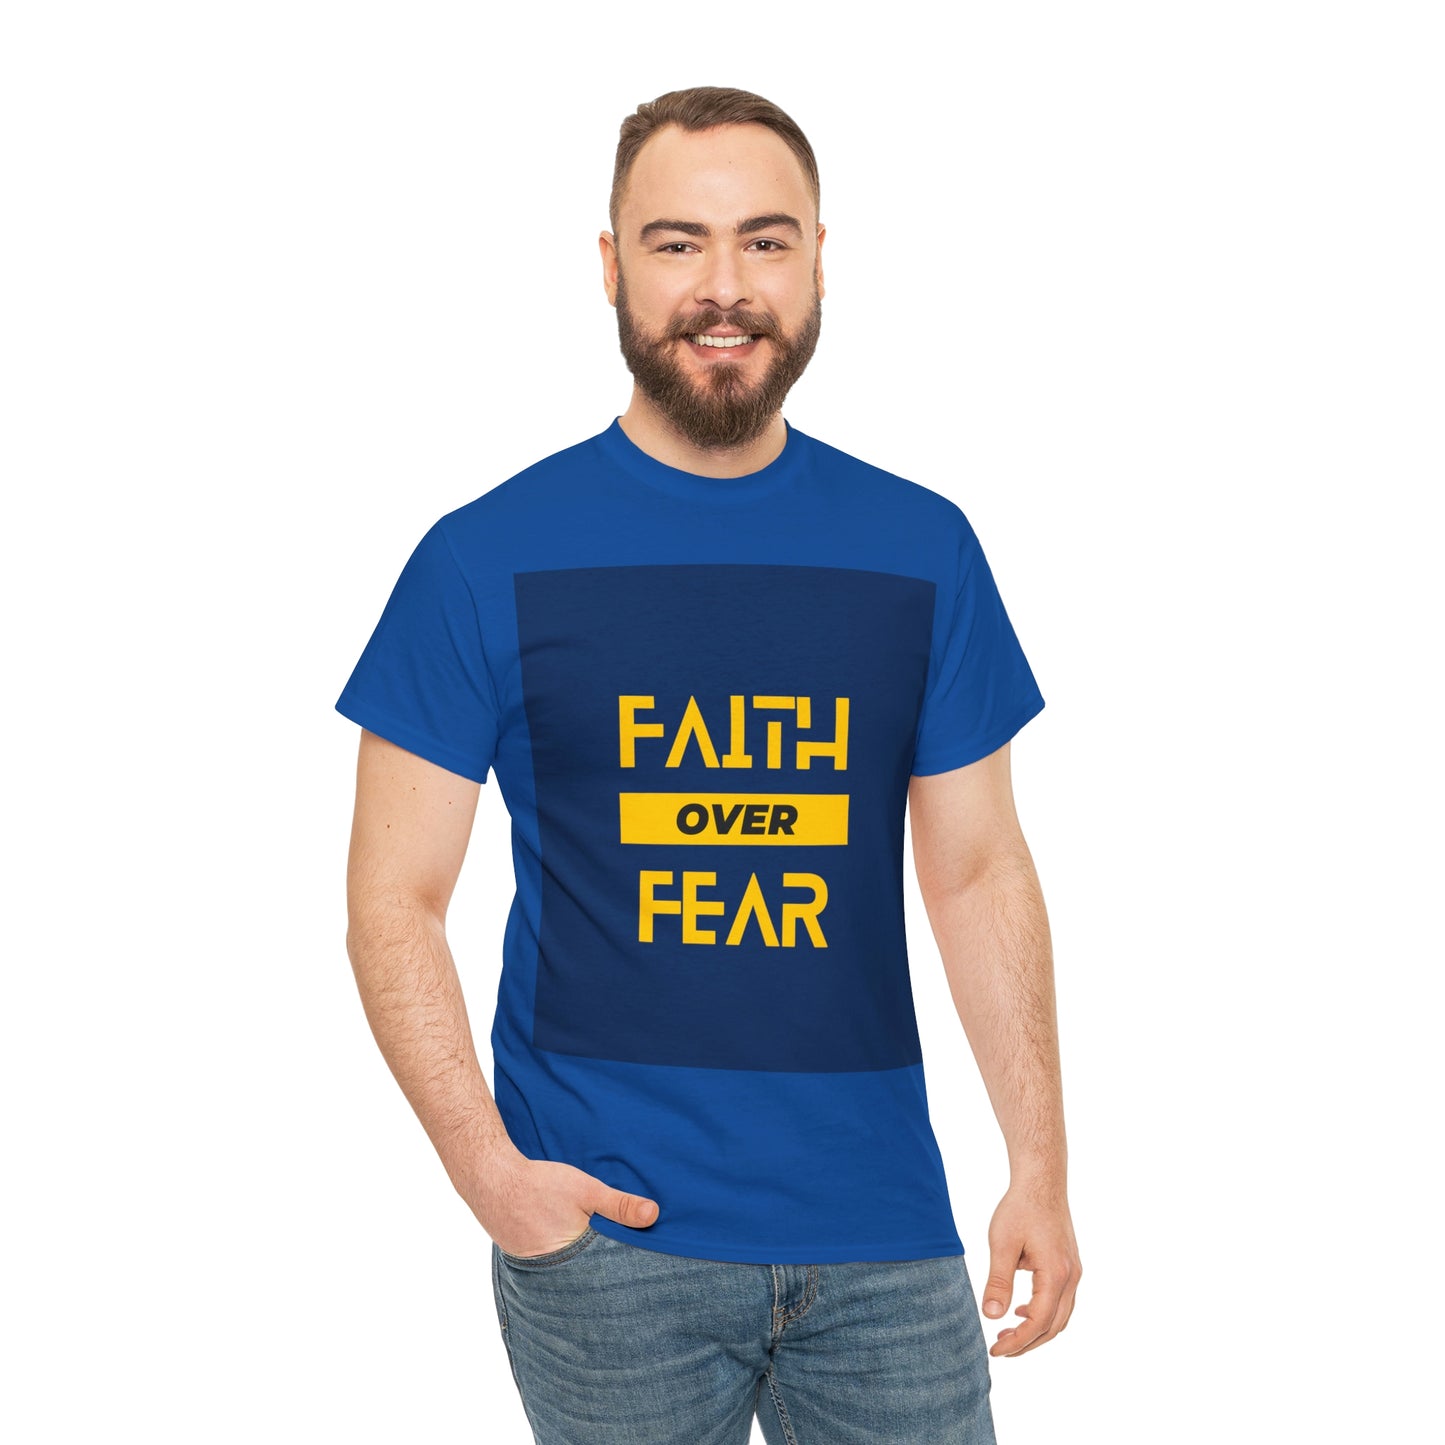 Faith over fear Your Style  Our Custom Printed Tee Unique Design Comfortable Fit  Personalized  You.  color, funny tshirt tee shirt